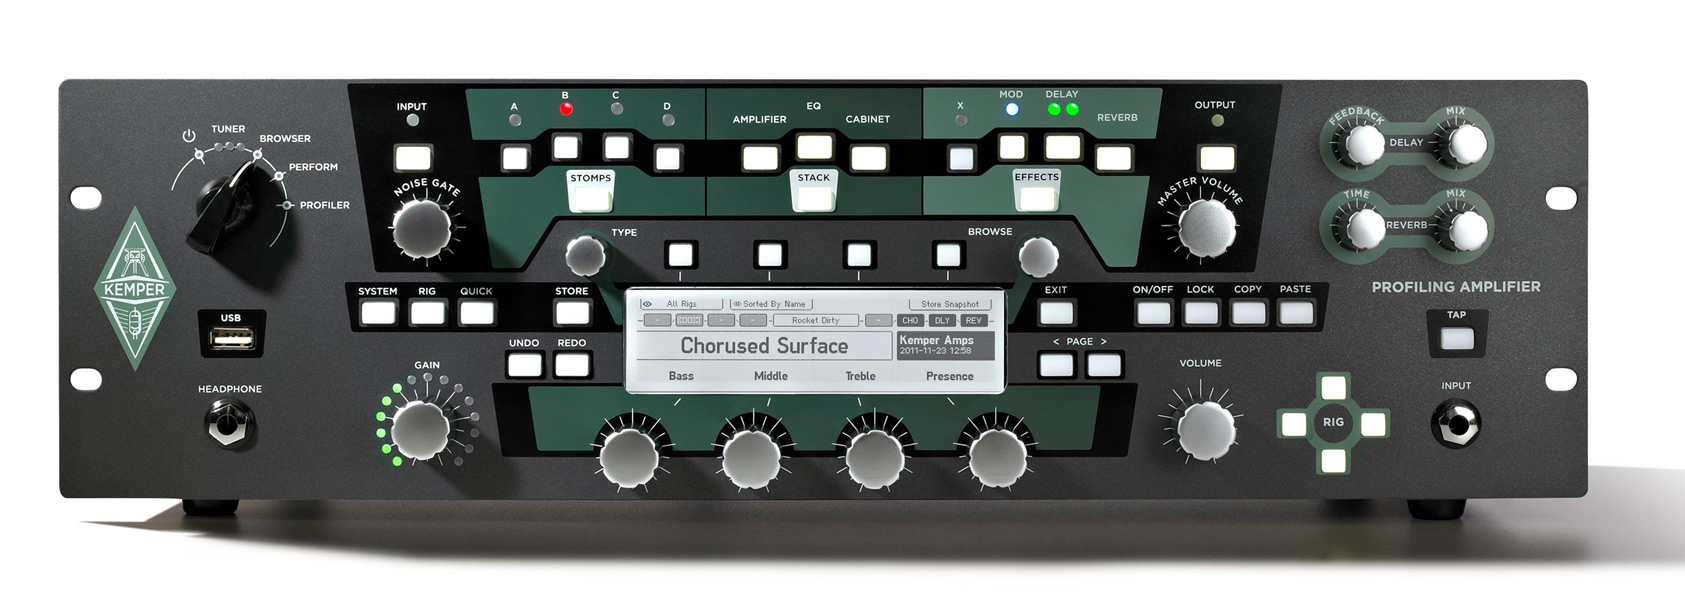 Kemper POWERRACK+REMOTE Profiler PowerRack Remote 600W Rackmount Profiling  Guitar Amplifier Head With Remote Foot Controller Full Compass Systems